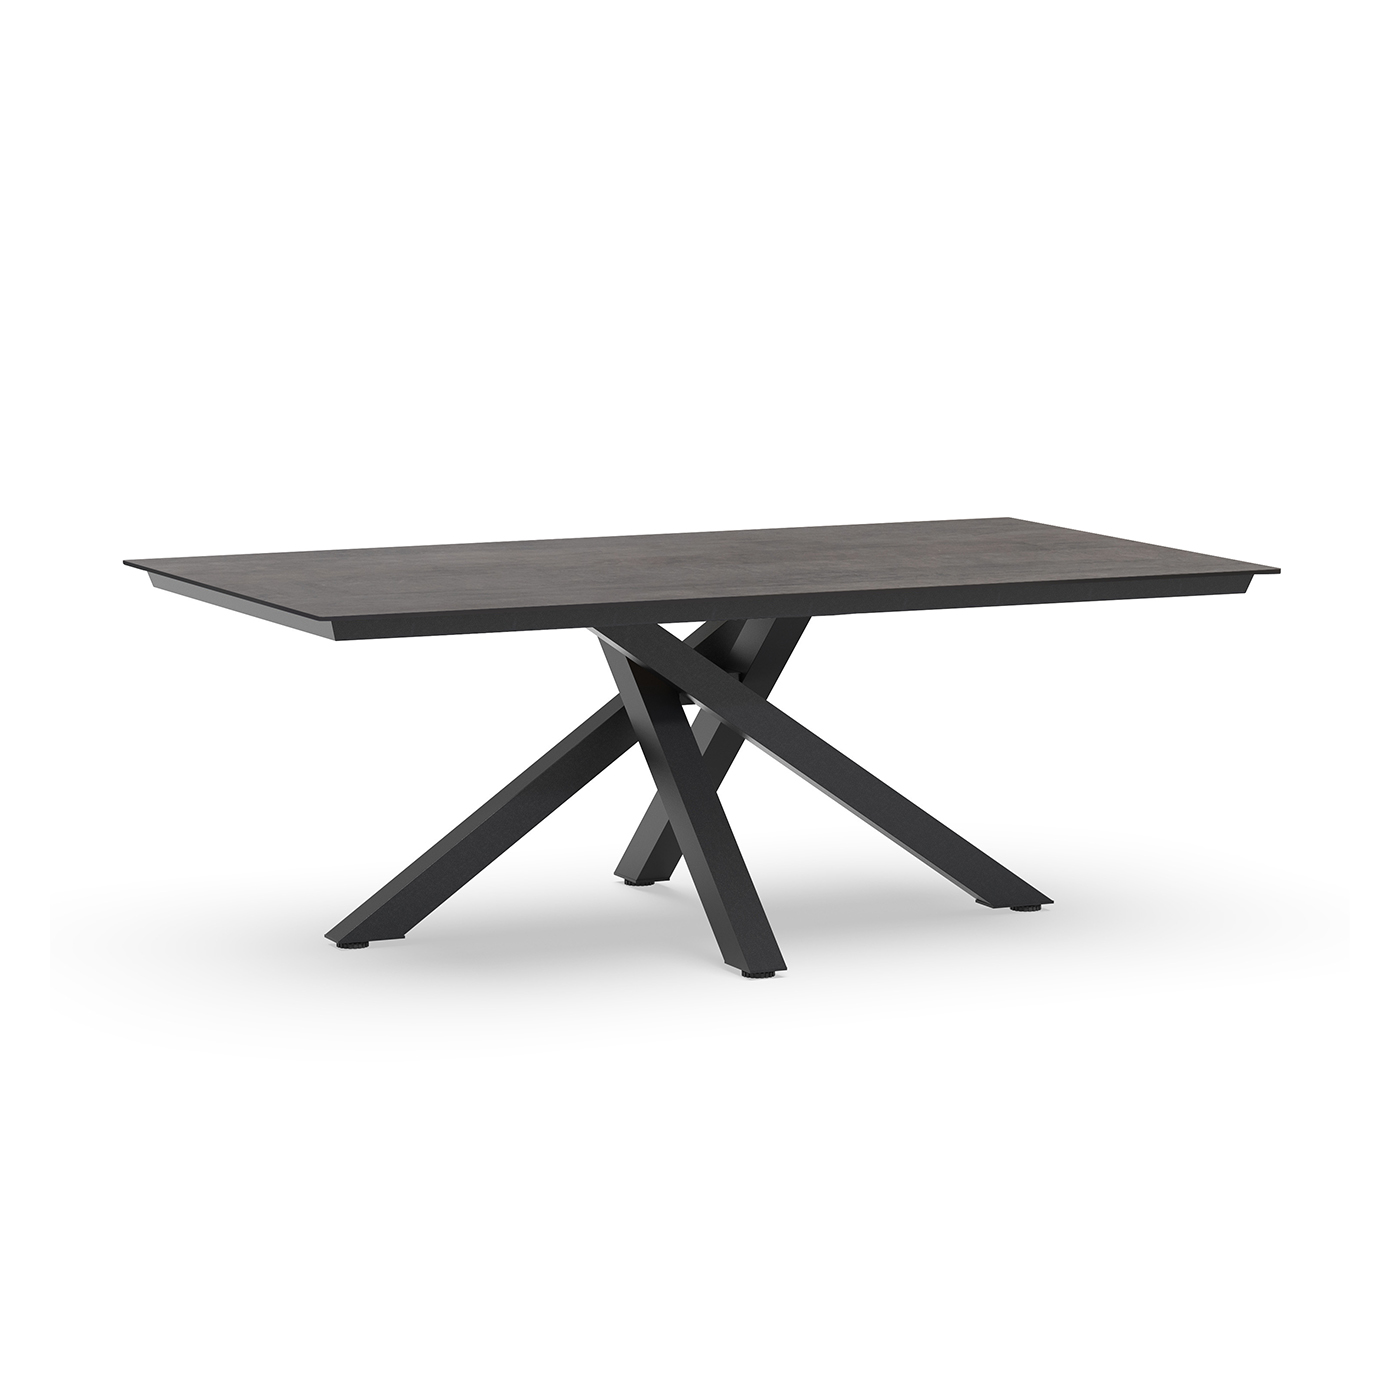 Orion Low Dining Table Trespa Forest Grey 180 x 100 cm Charcoal